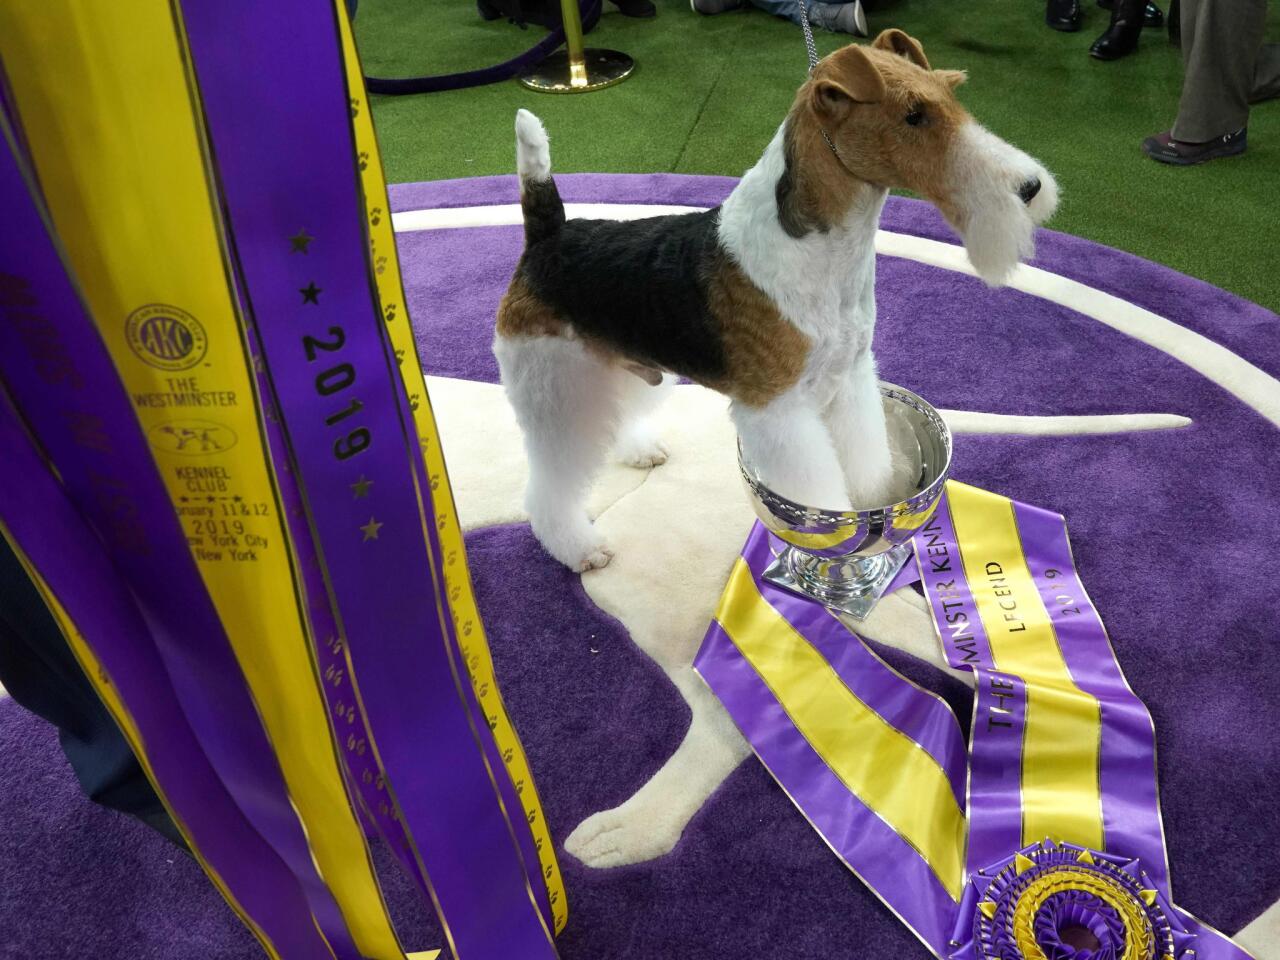 King, a wire hair fox terrier, poses after winning Best in Show at the Westminster Kennel Club Dog Show at Madison Square Garden in New York on Feb. 12.